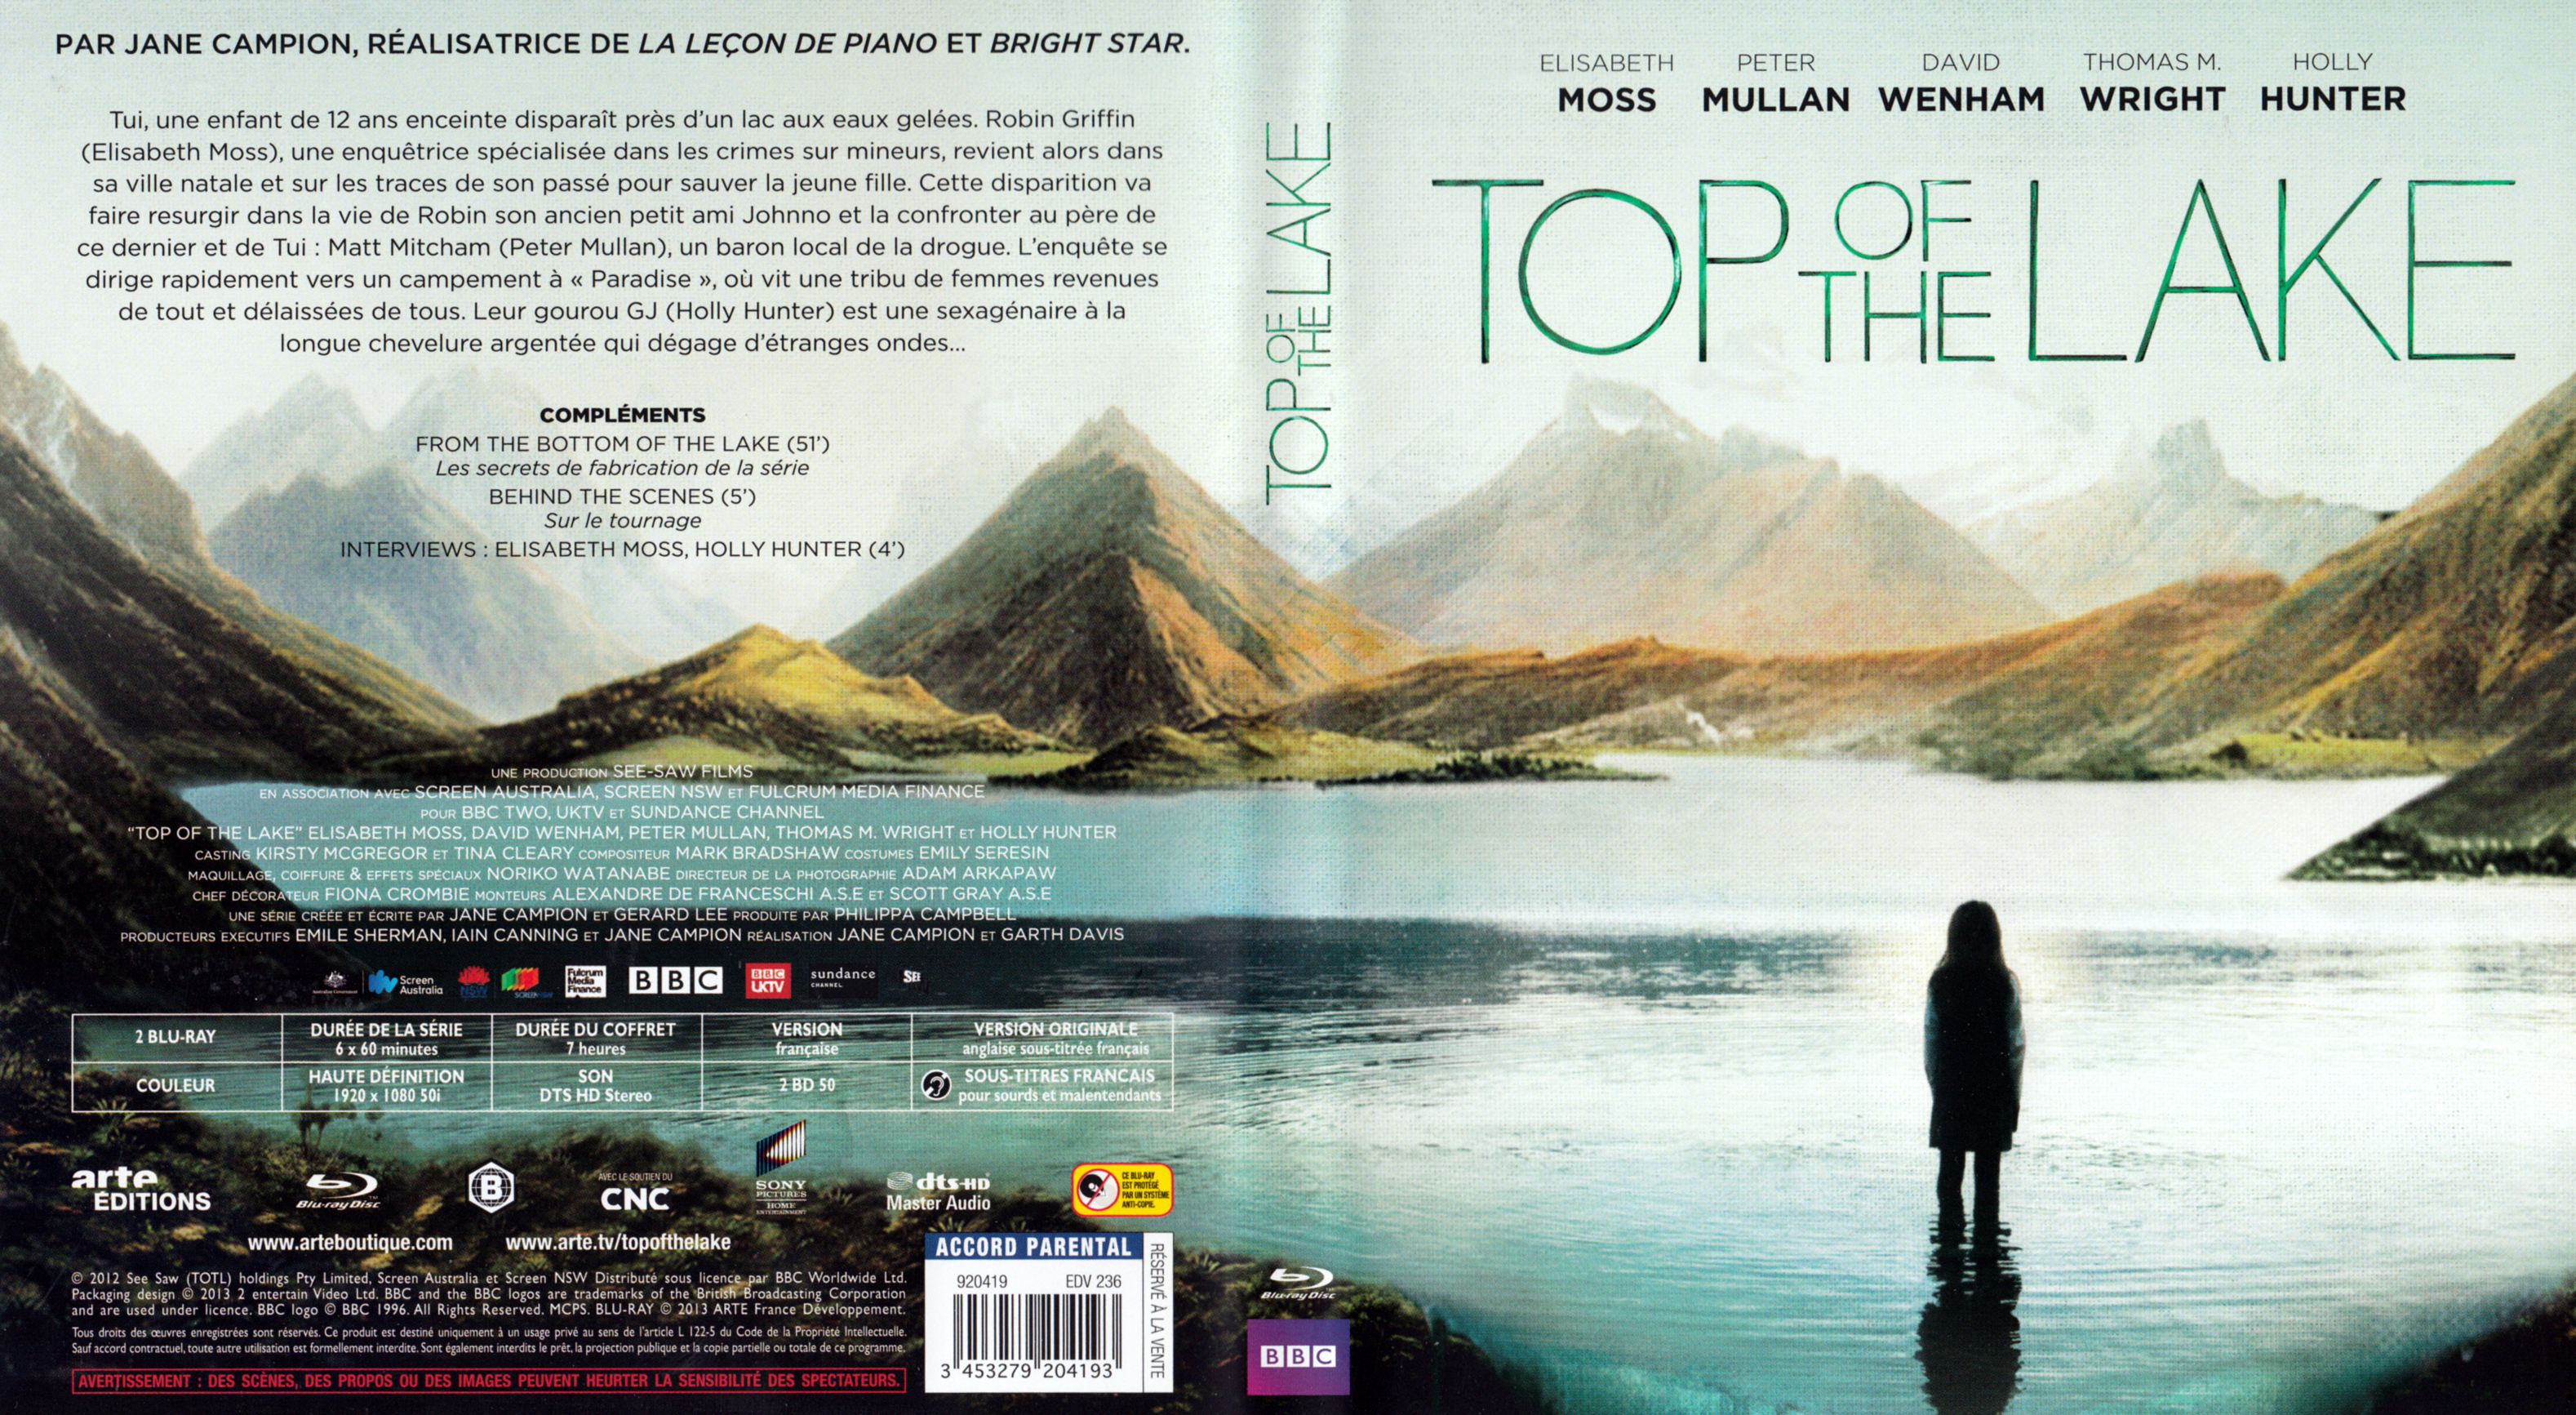 Jaquette DVD Top of the lake (BLU-RAY)